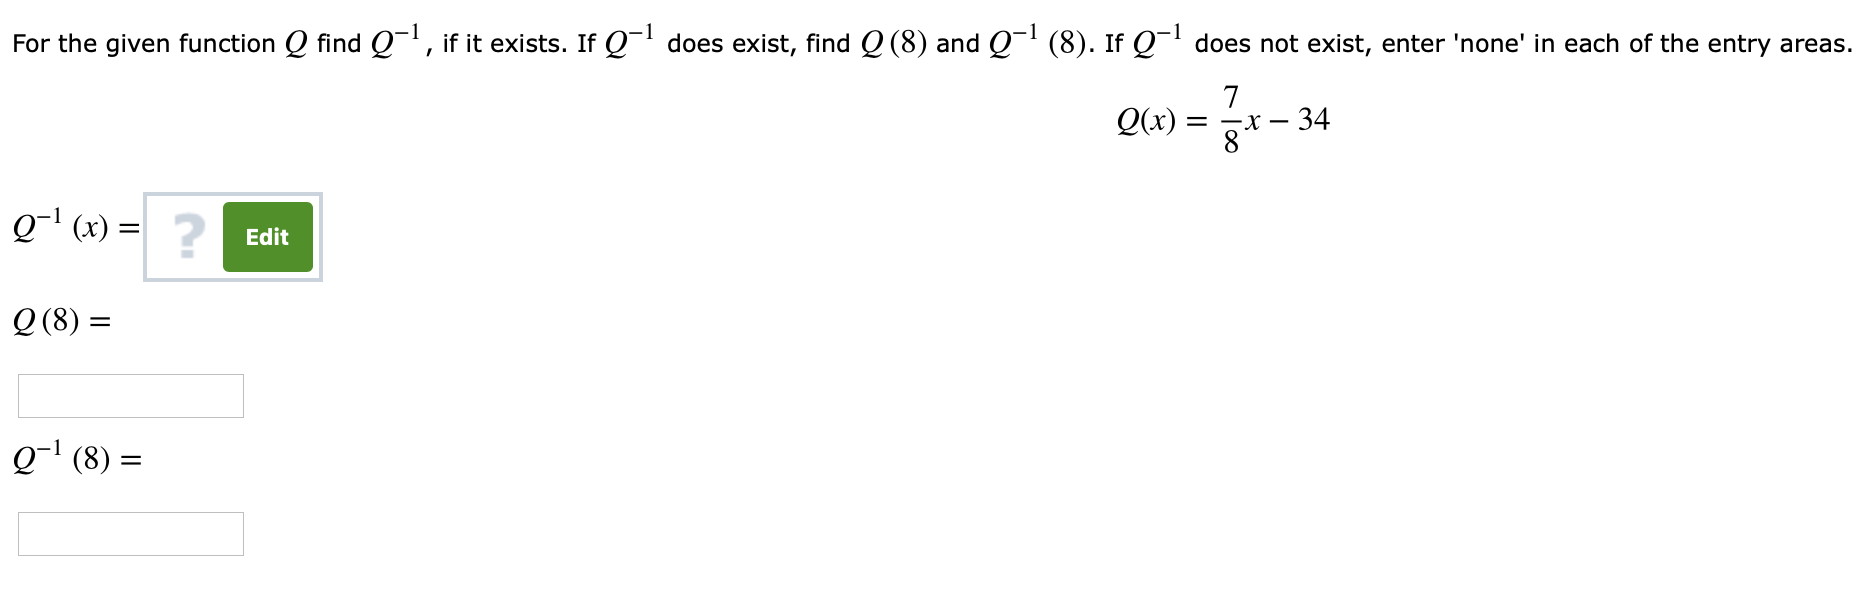 For the given function
ind Q, if it exists. I Qdoes exist, find Q (8) and Q
(8). Ir 01 does not exist, enter 'none' in each of the entry areas.
7
Q-1 (x) =
?
Edit
Q (8)
Q-1 (8) =
